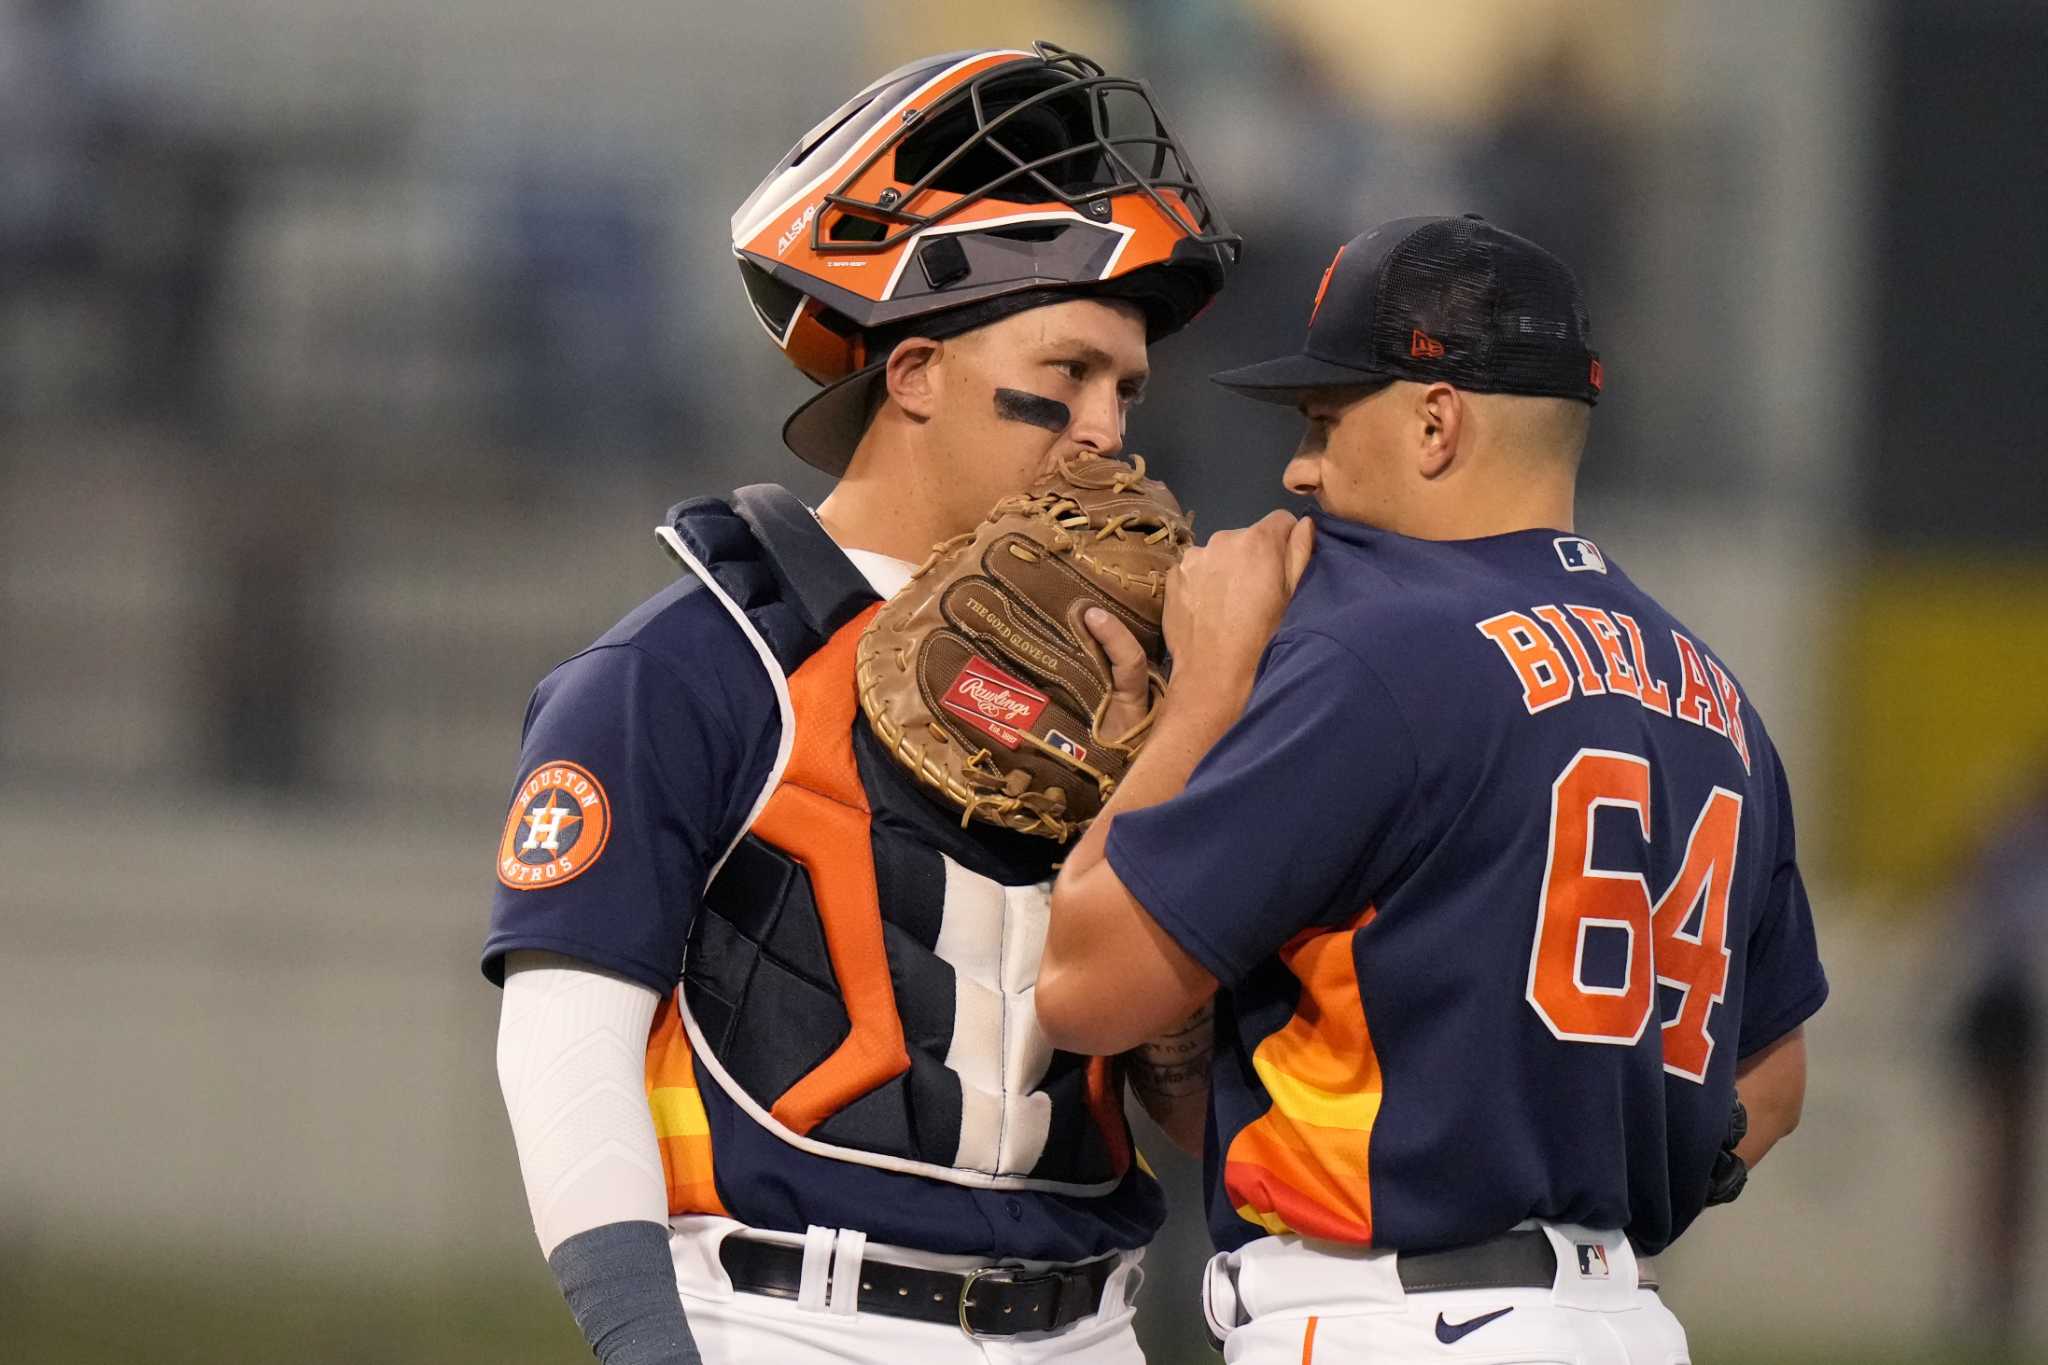 Astros opening day roster battle down to the wire'